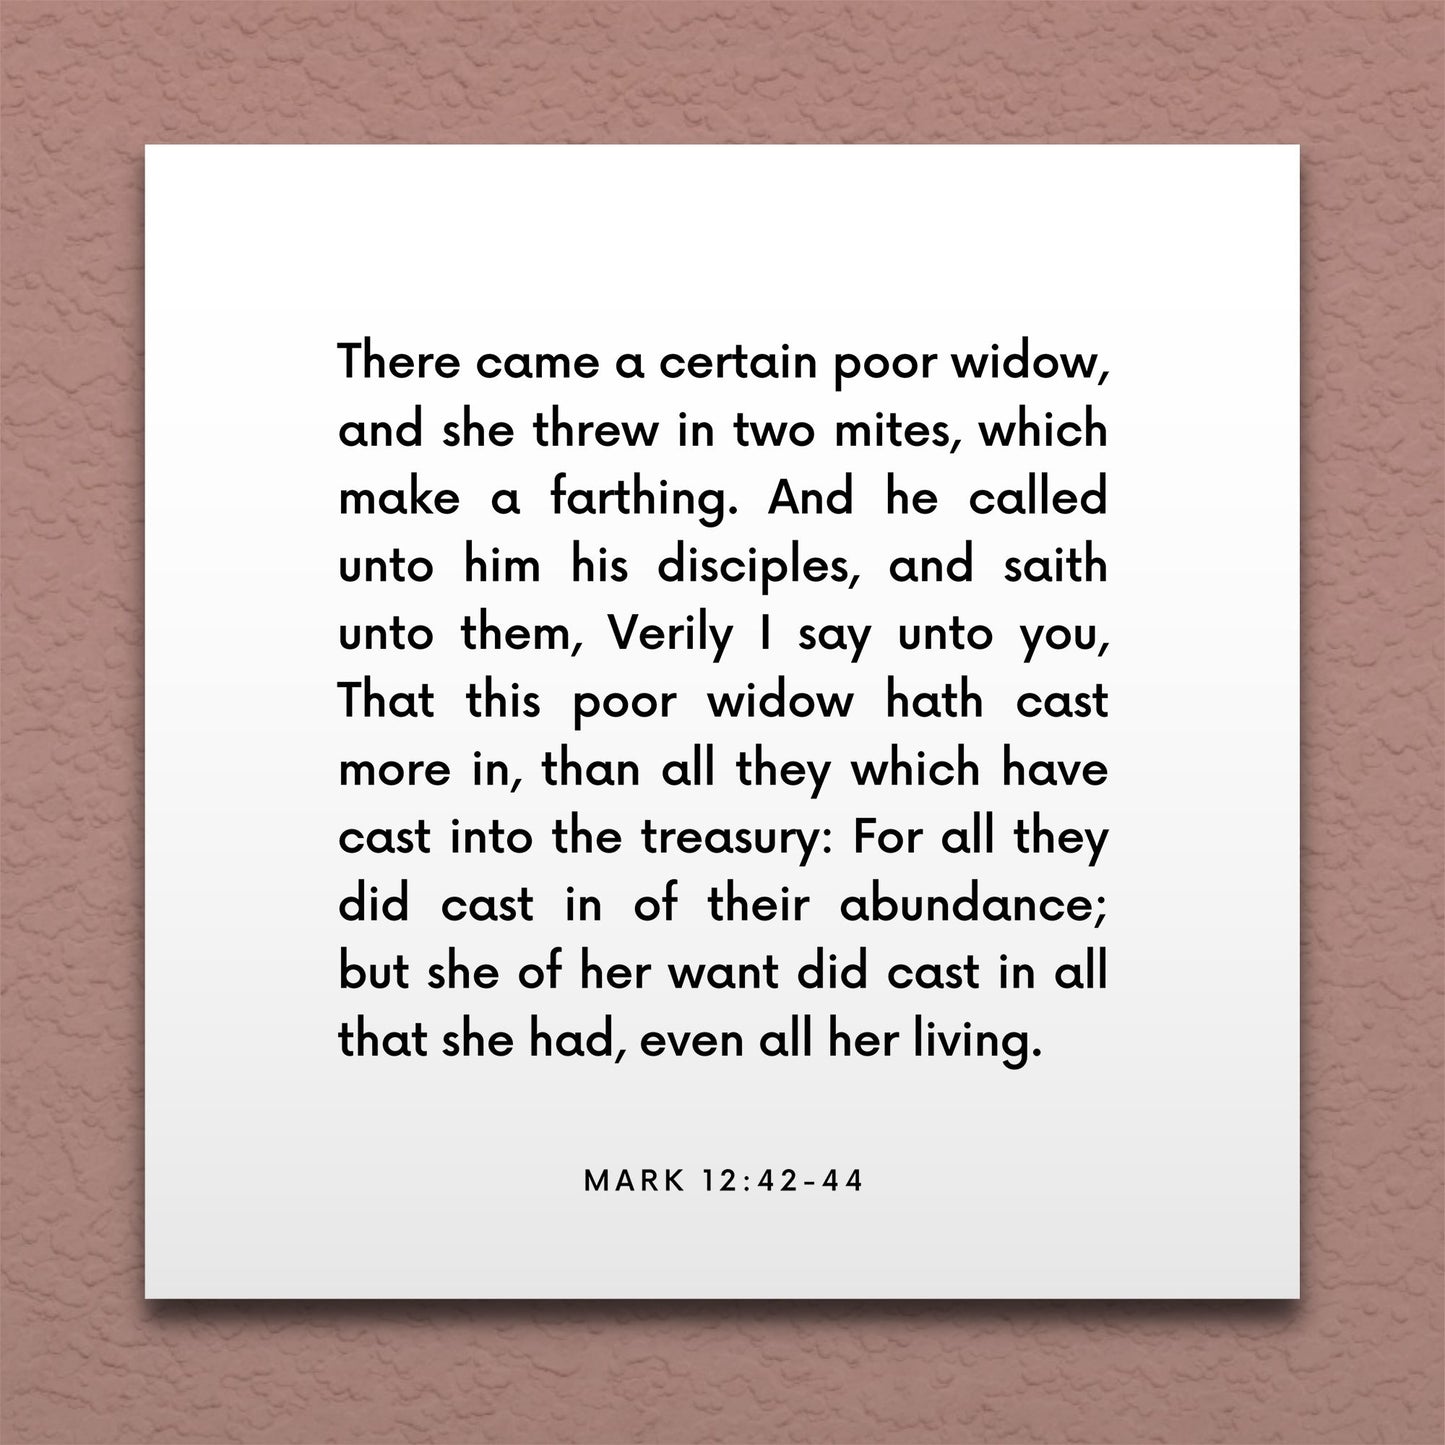 Wall-mounted scripture tile for Mark 12:42-44 - "This poor widow hath cast more in than all they"